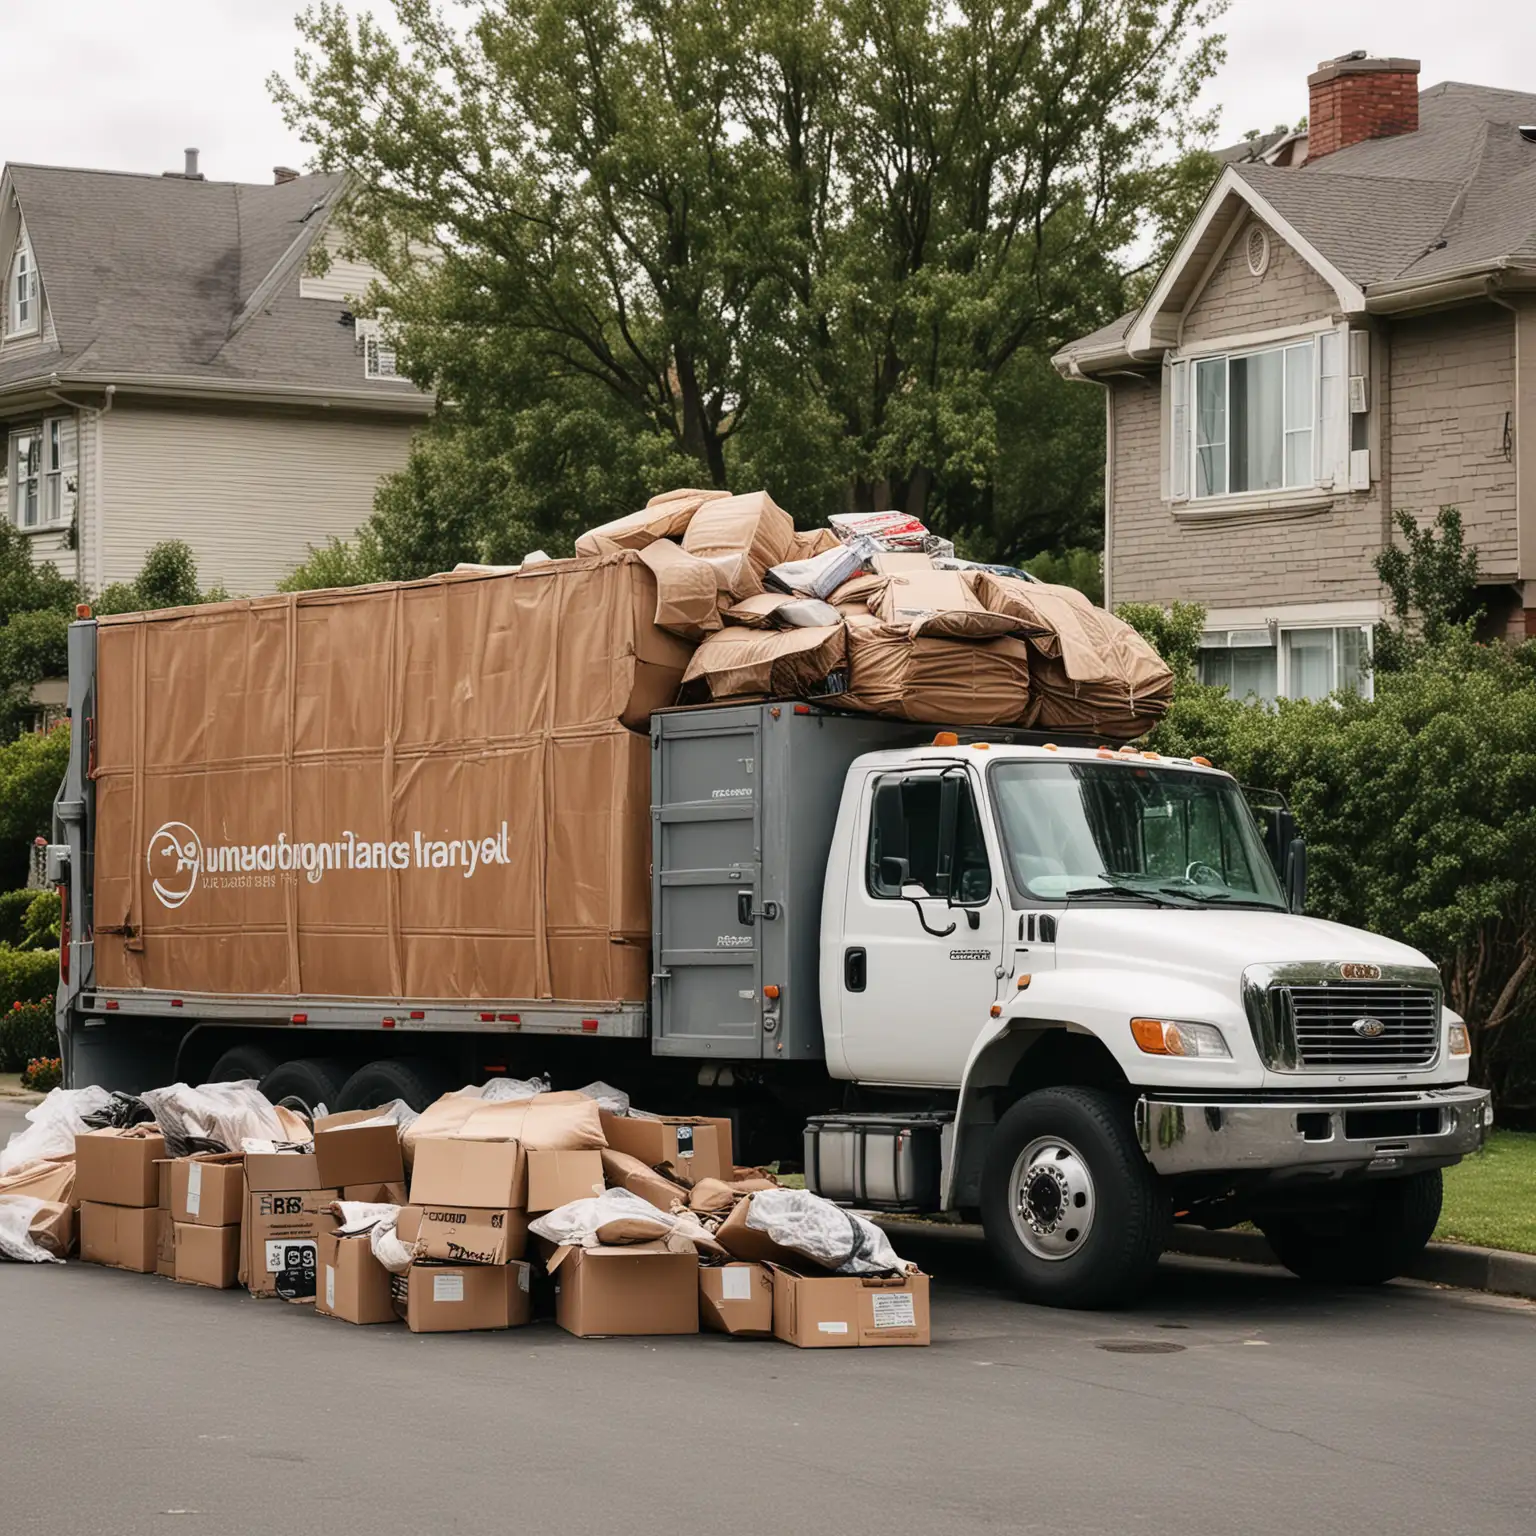 Professional Junk Removal Services Route Runners Truck Clearing Property Clutter